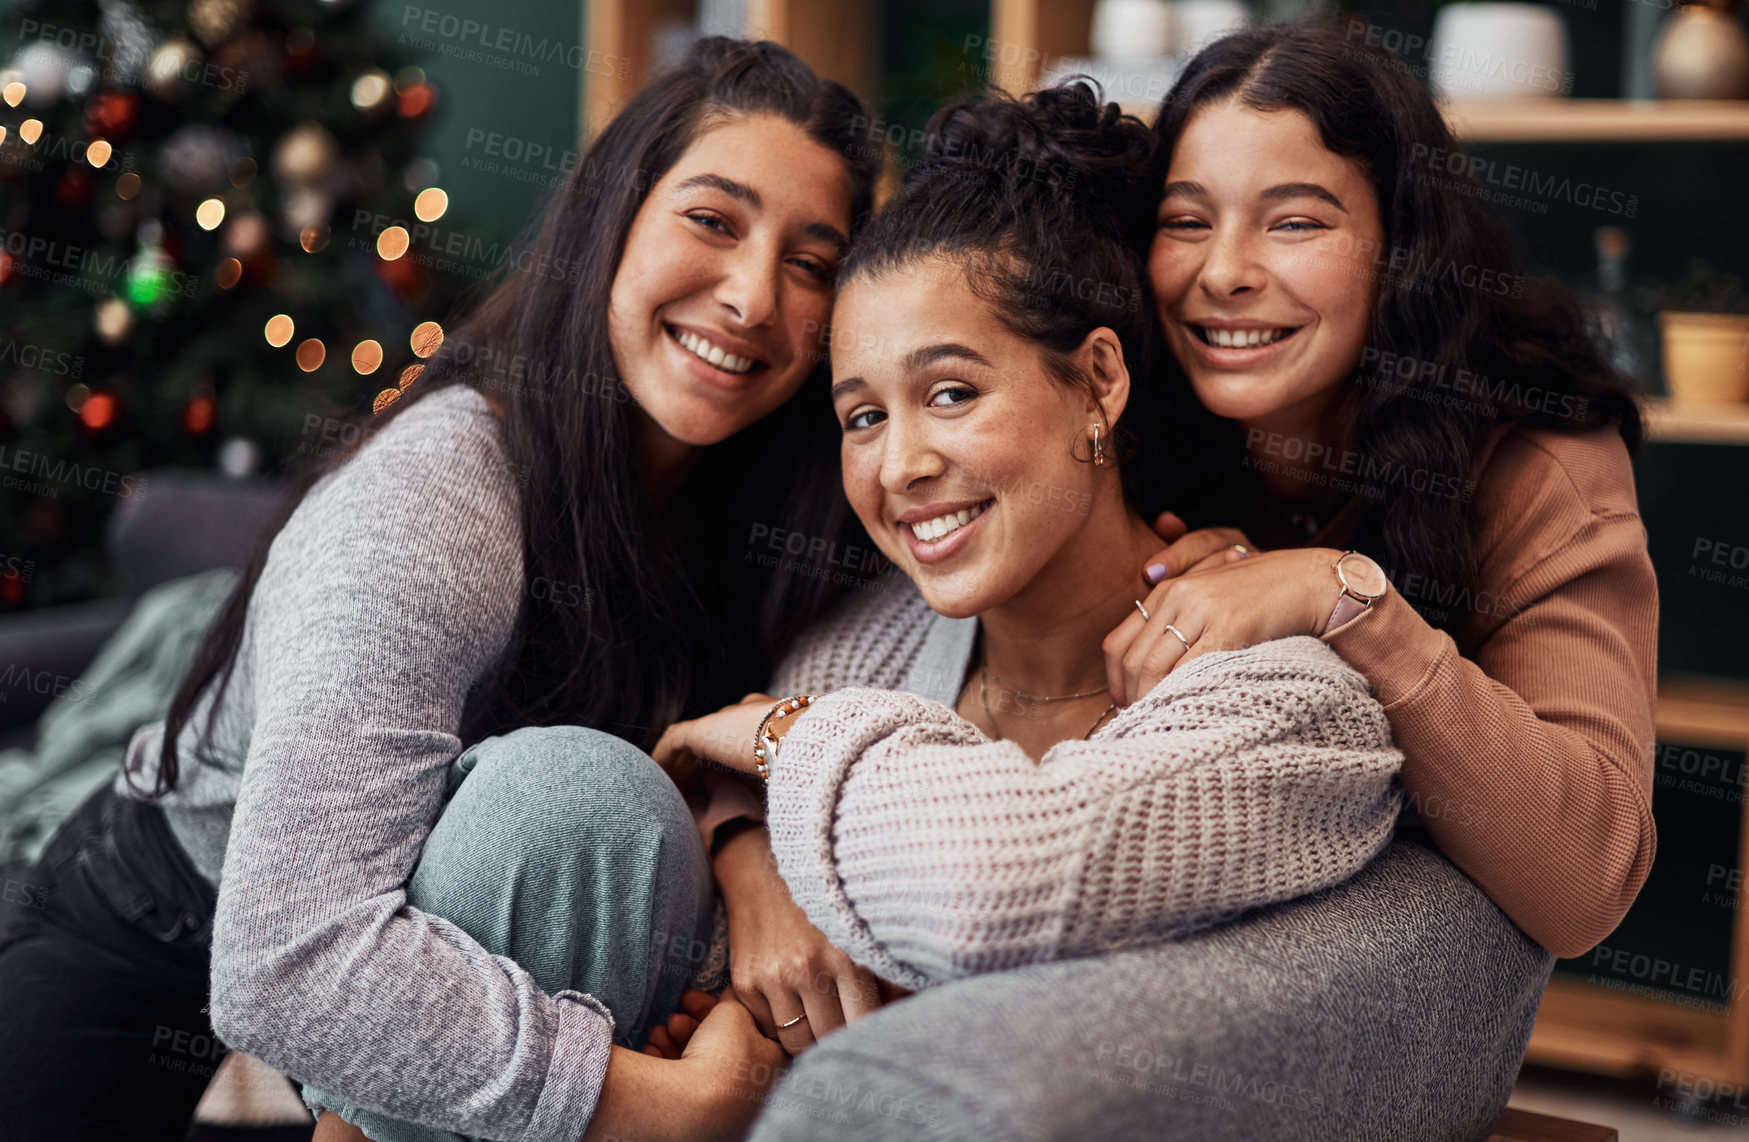 Buy stock photo Shot of young sisters relaxing on the sofa together during Christmas at home